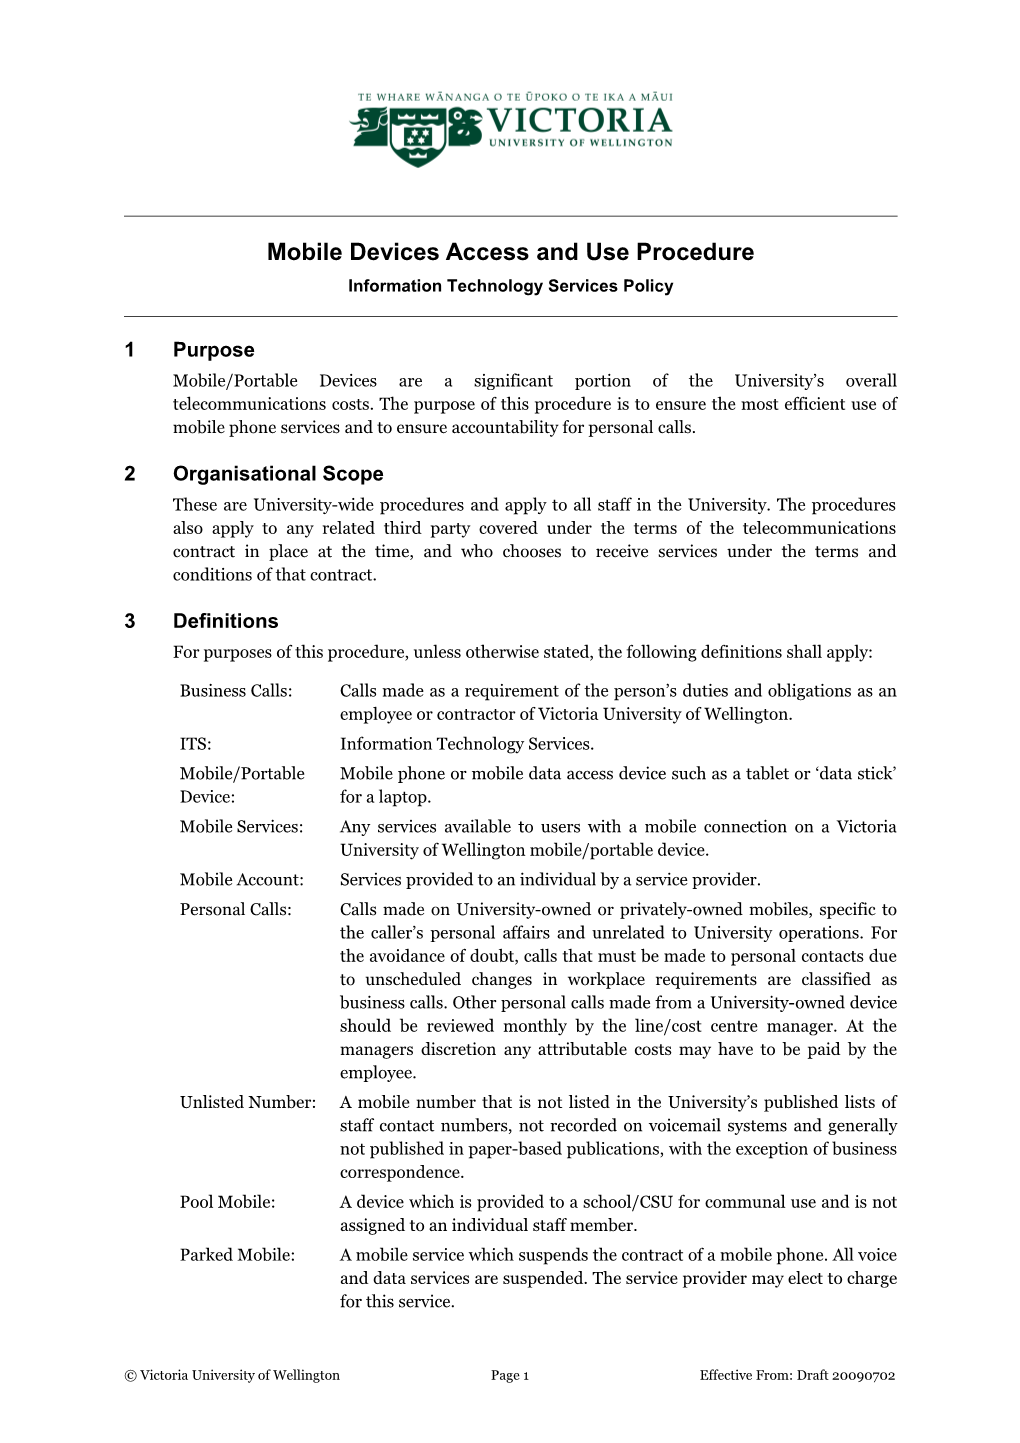 Mobile Devices Access and Use Procedure